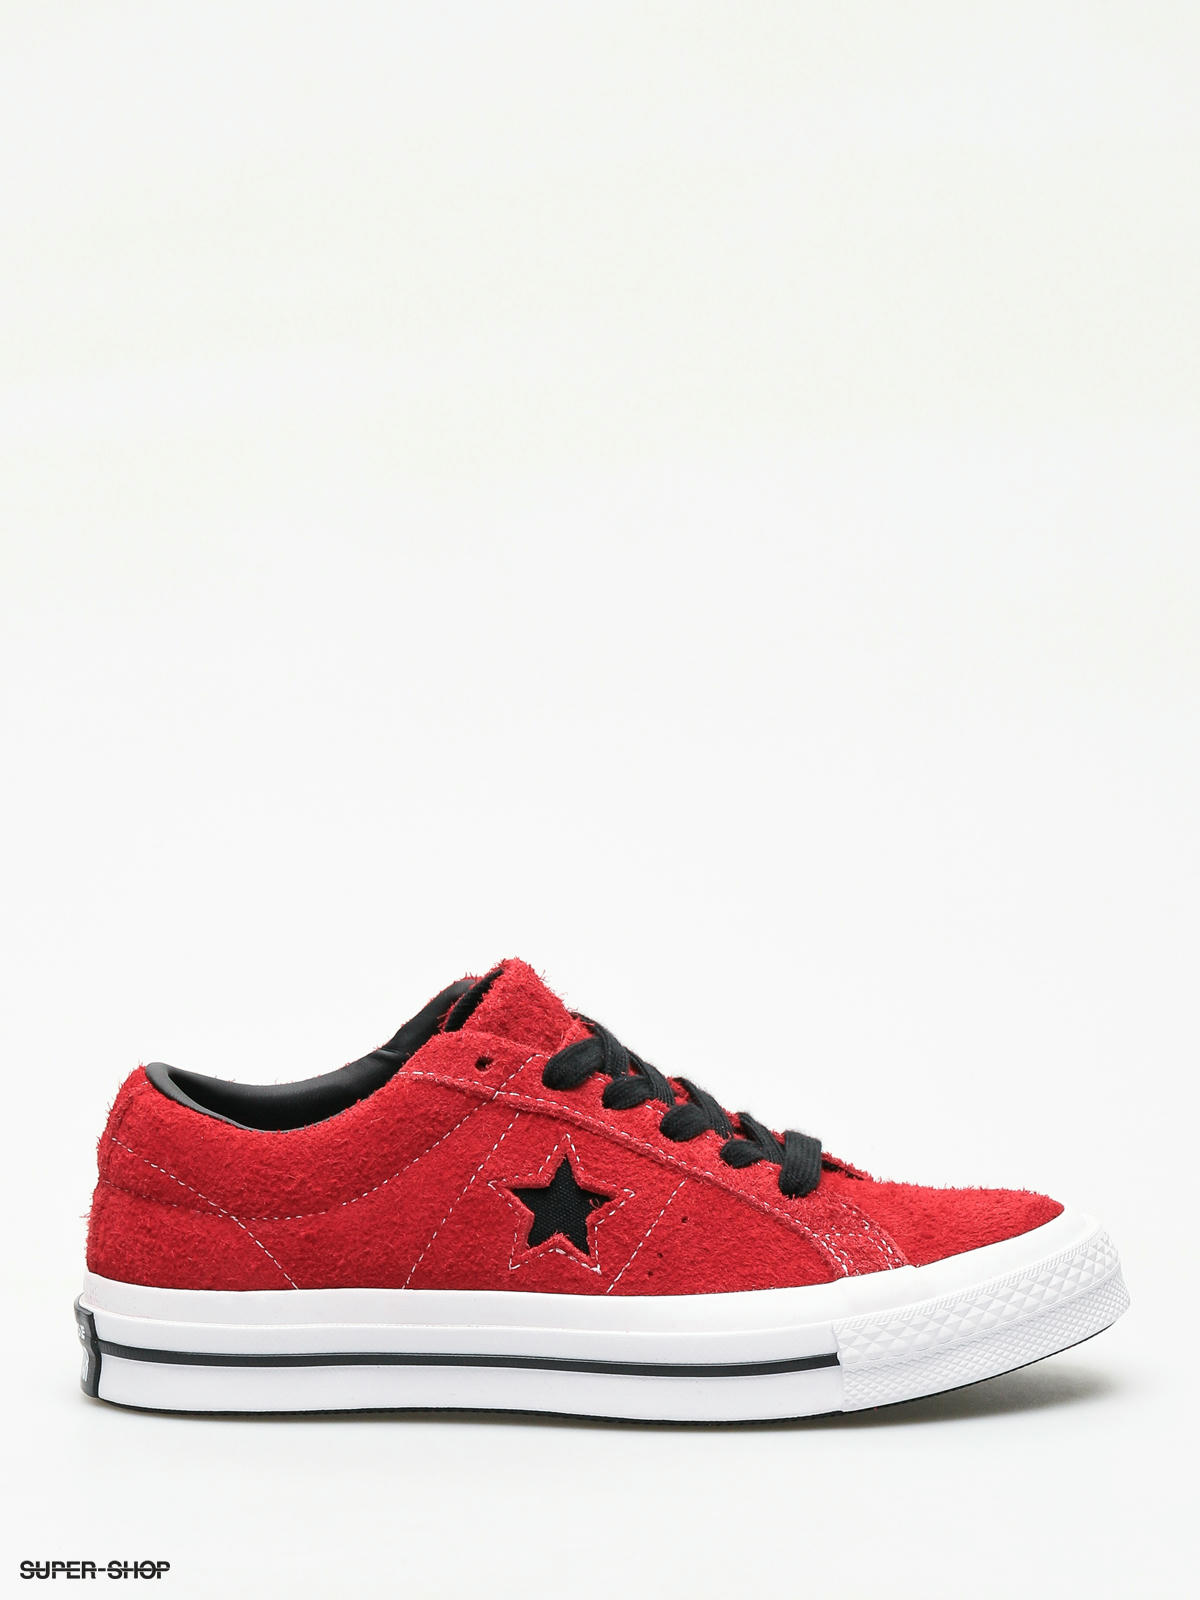 red and black chucks